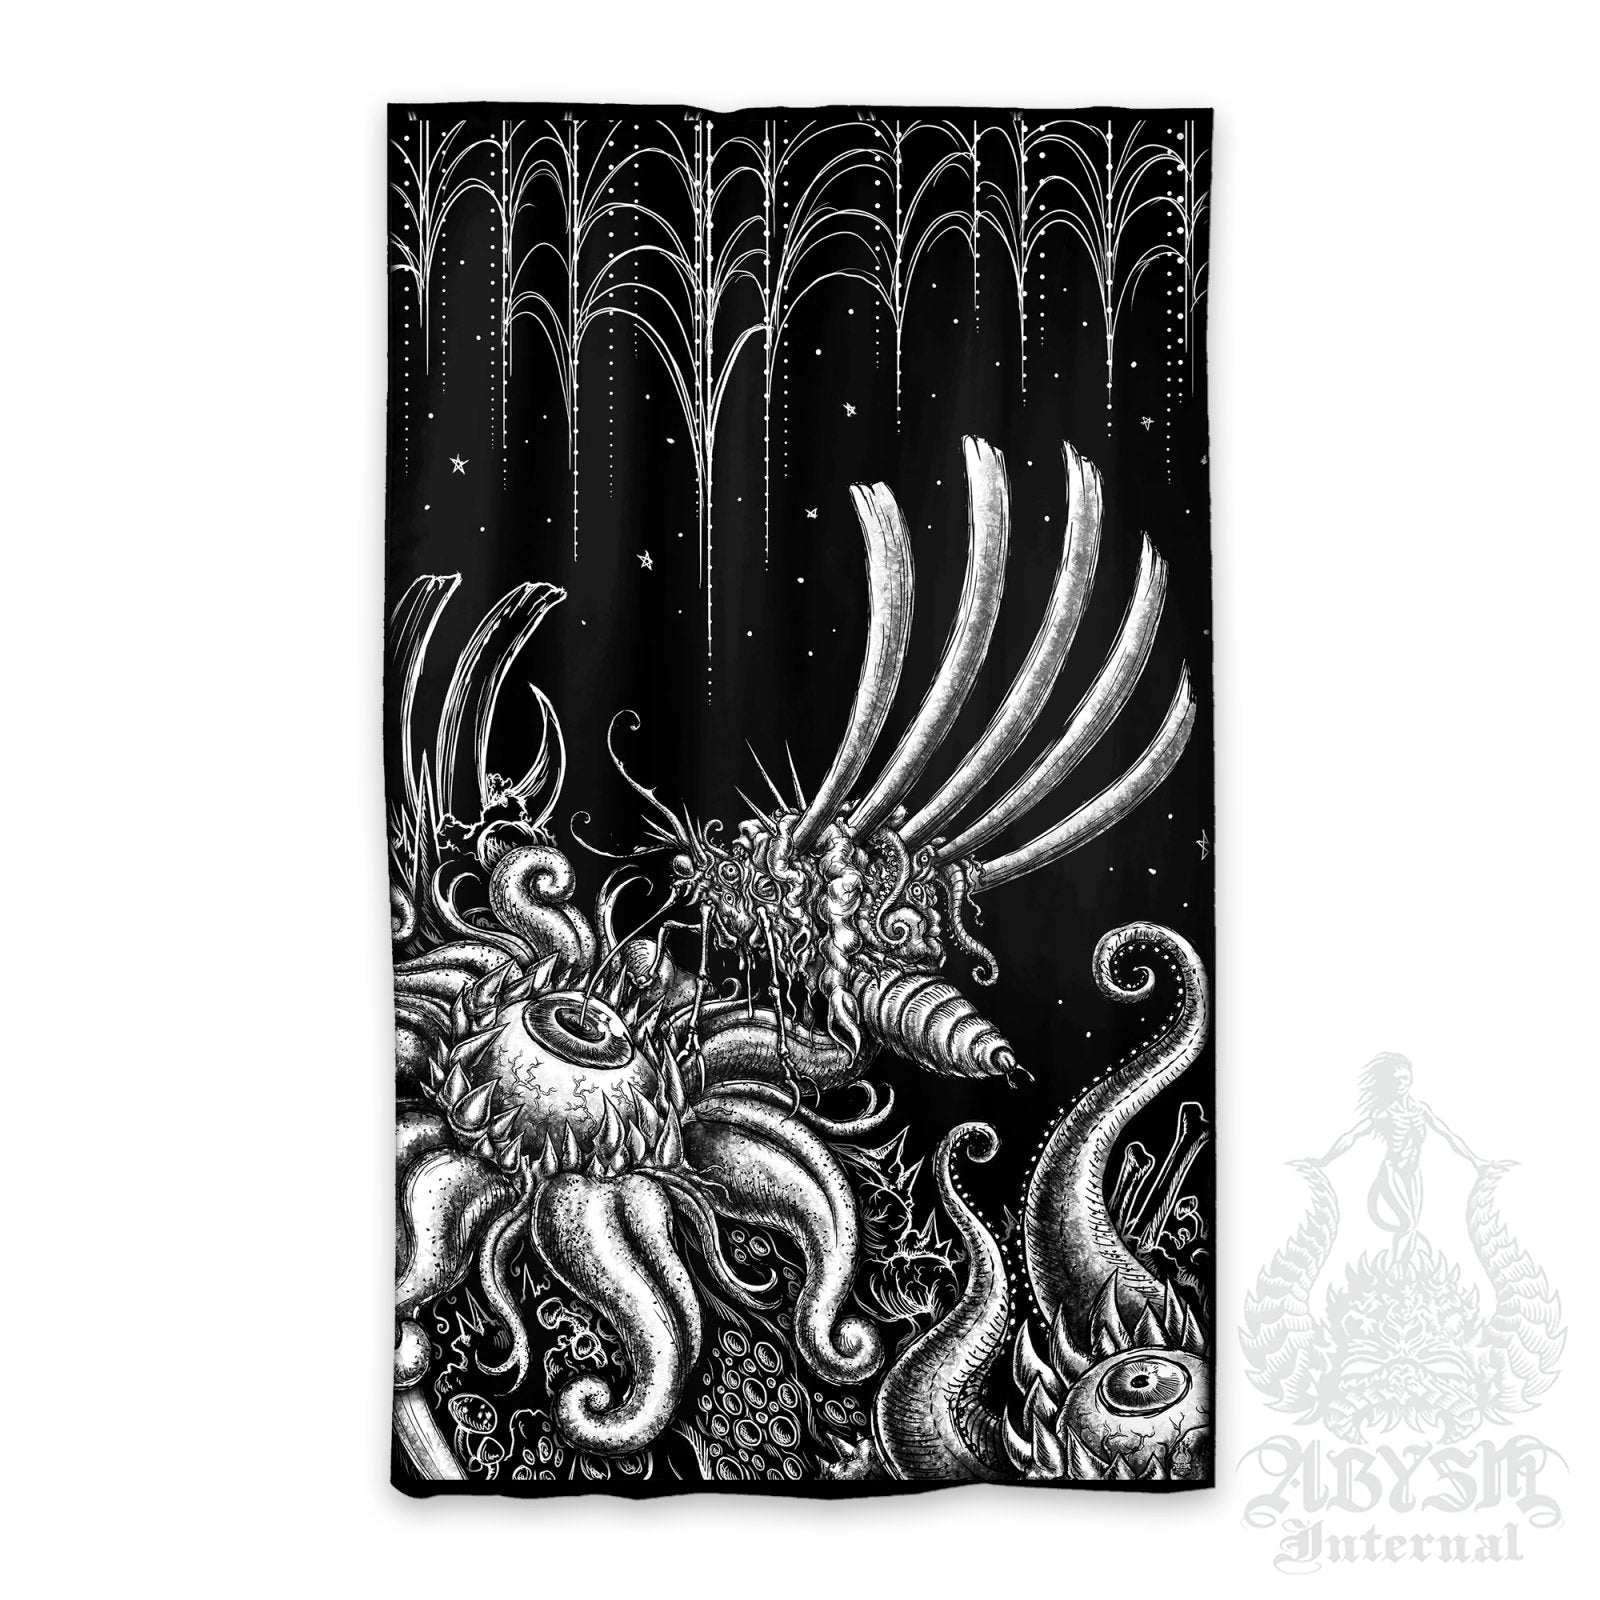 Gross Blackout Curtains, Long Window Panels, Macabre Art Print, Horror Room Decor - Gothic Hell, Gore Bloodfly - Abysm Internal